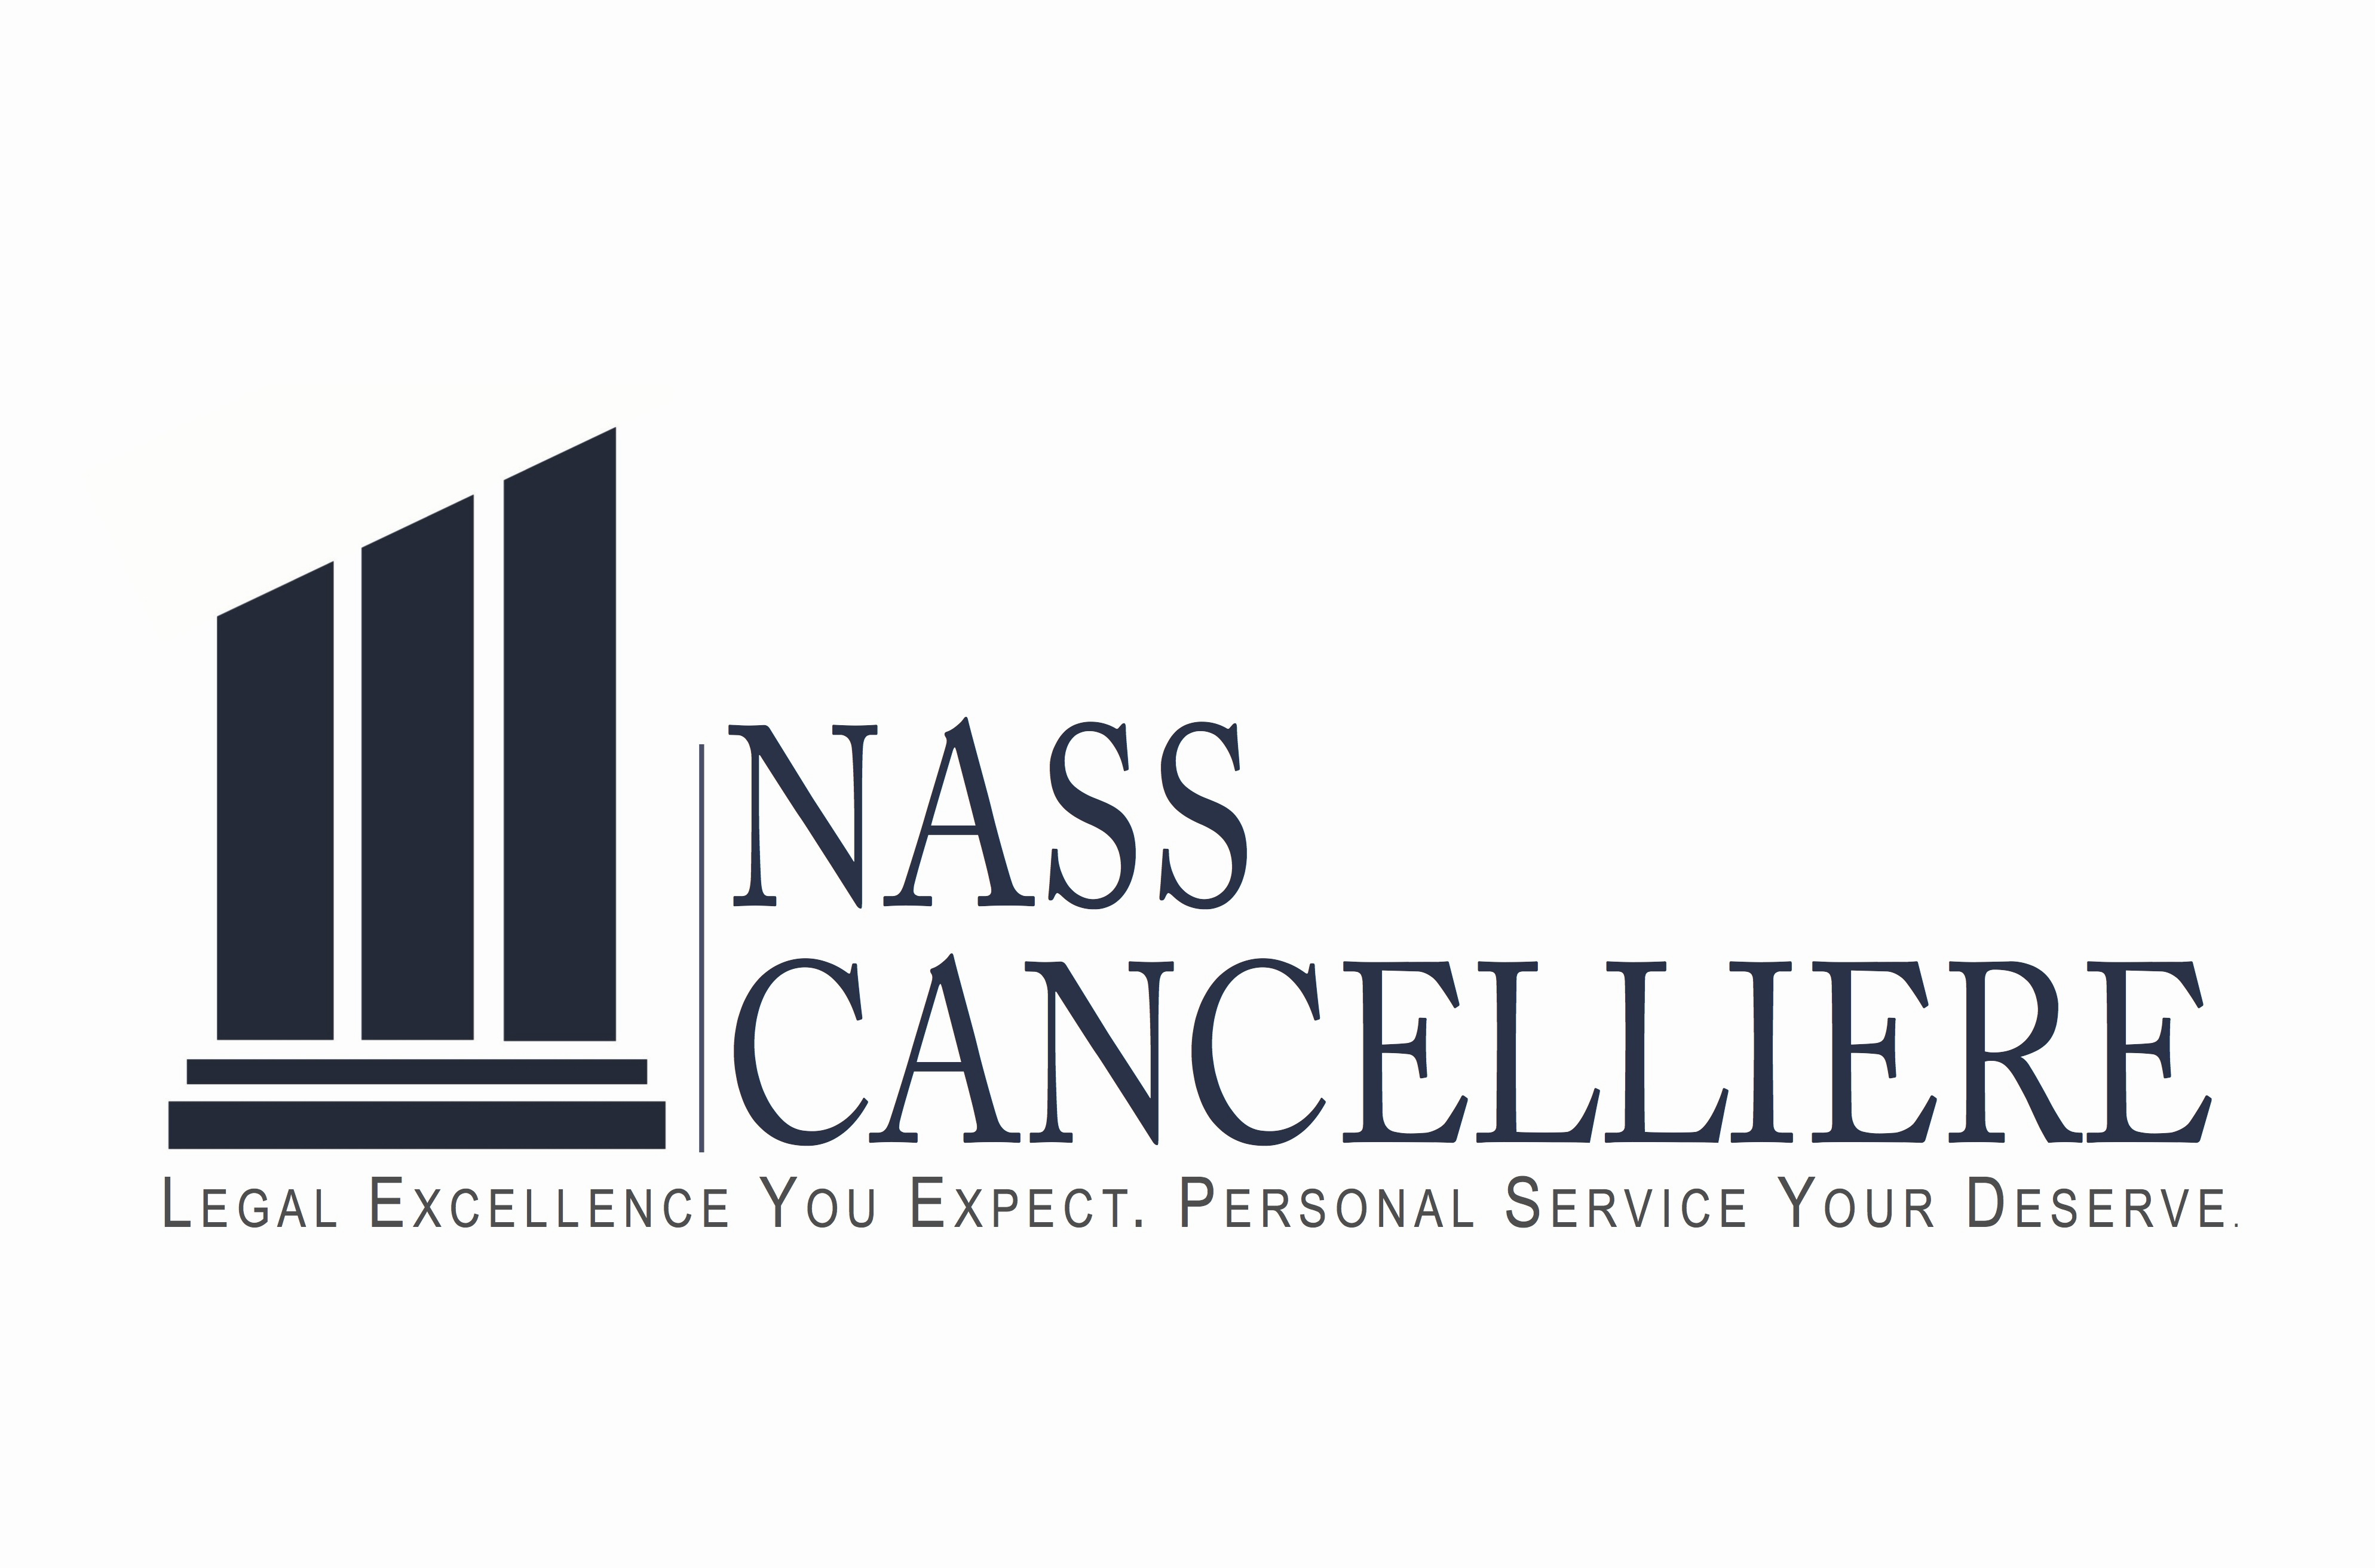 NASS CANCELLIERE